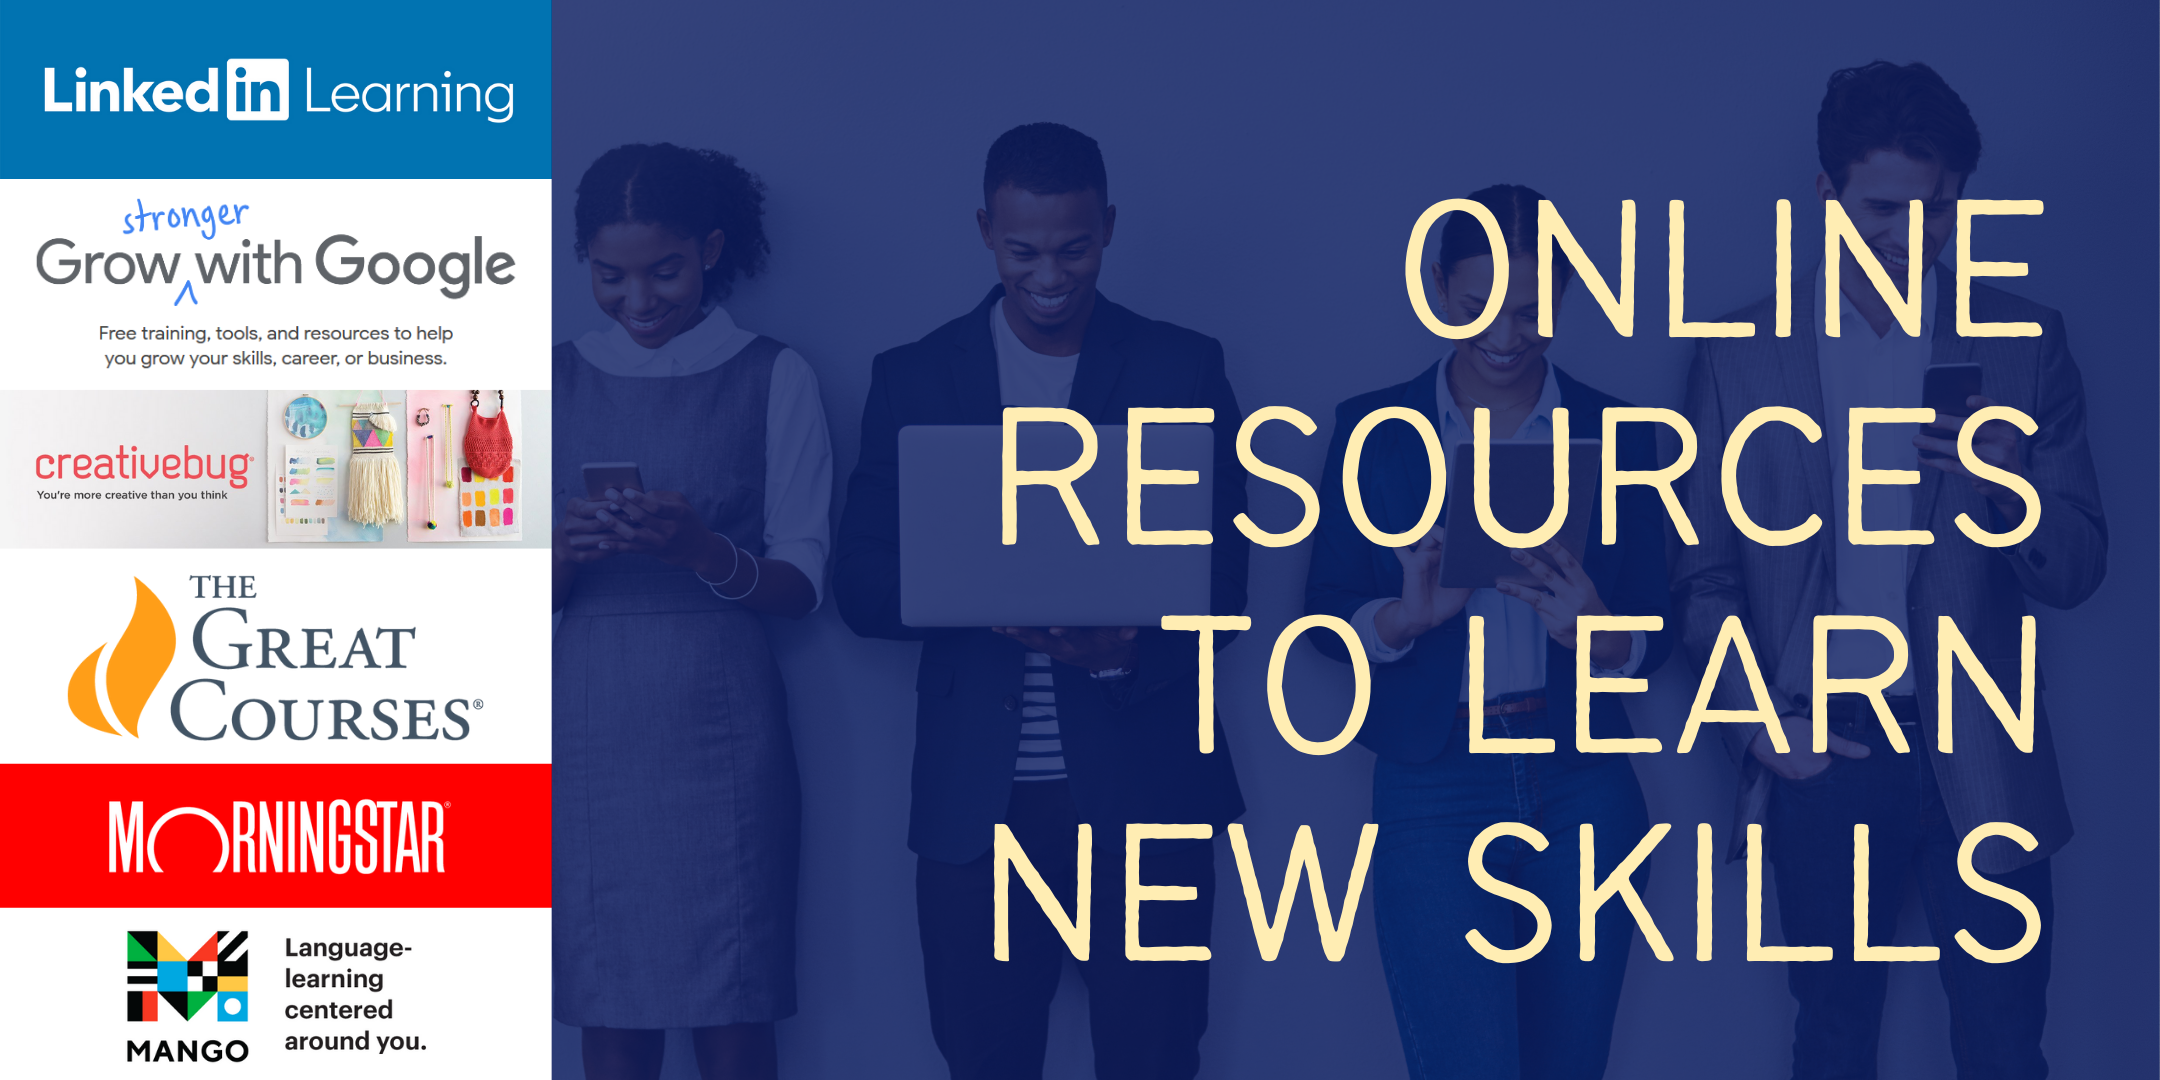 Online Resources to Learn New Skills event image